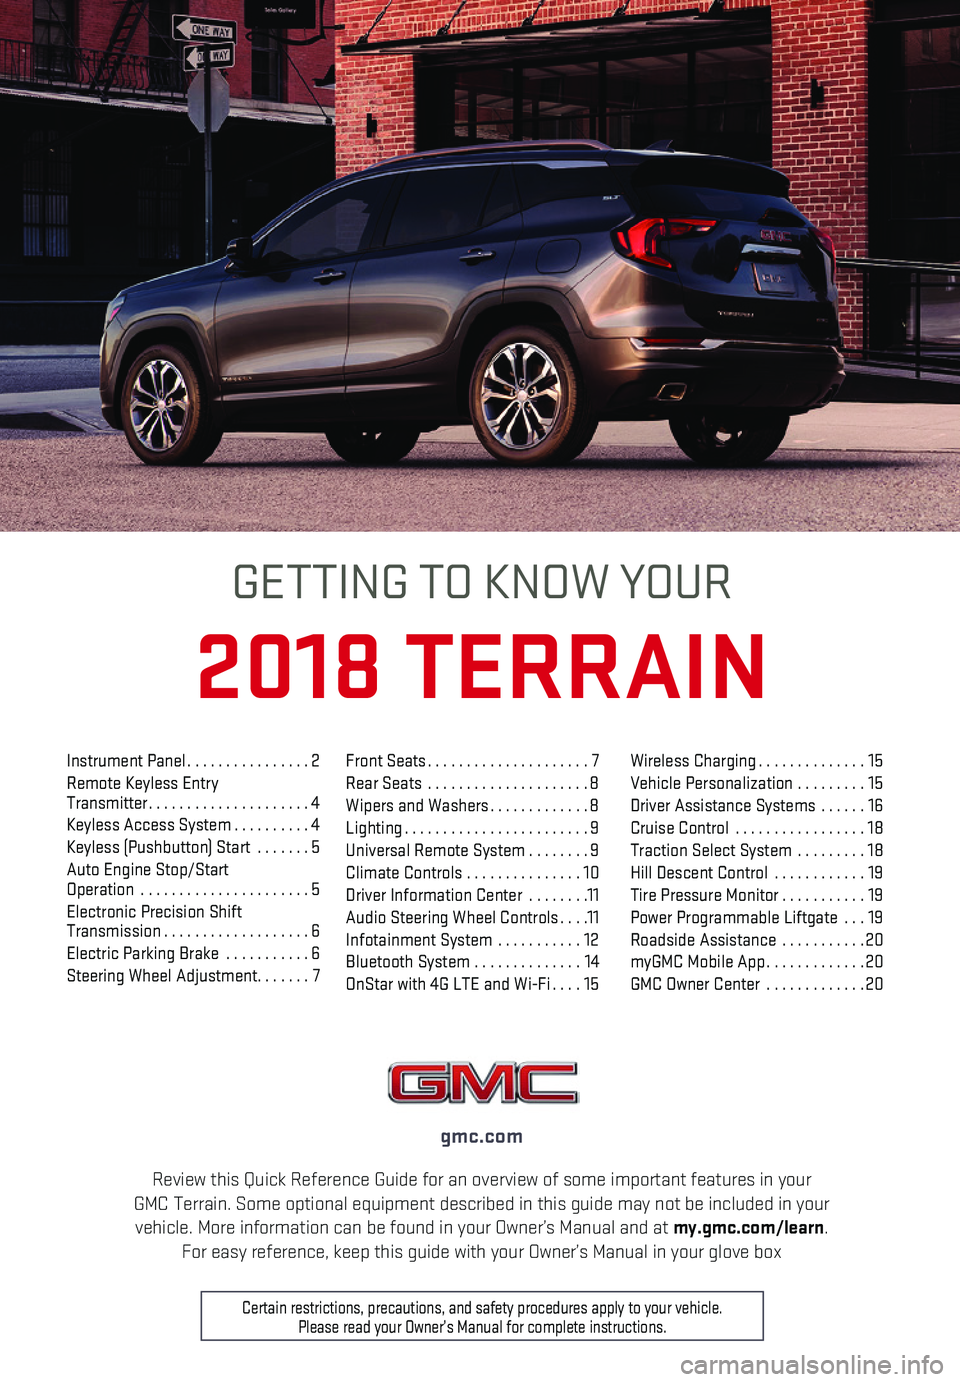 GMC TERRAIN 2018  Get To Know Guide 1
Review this Quick Reference Guide for an overview of some important feat\
ures in your GMC Terrain. Some optional equipment described in this guide may not be \
included in your vehicle. More inform